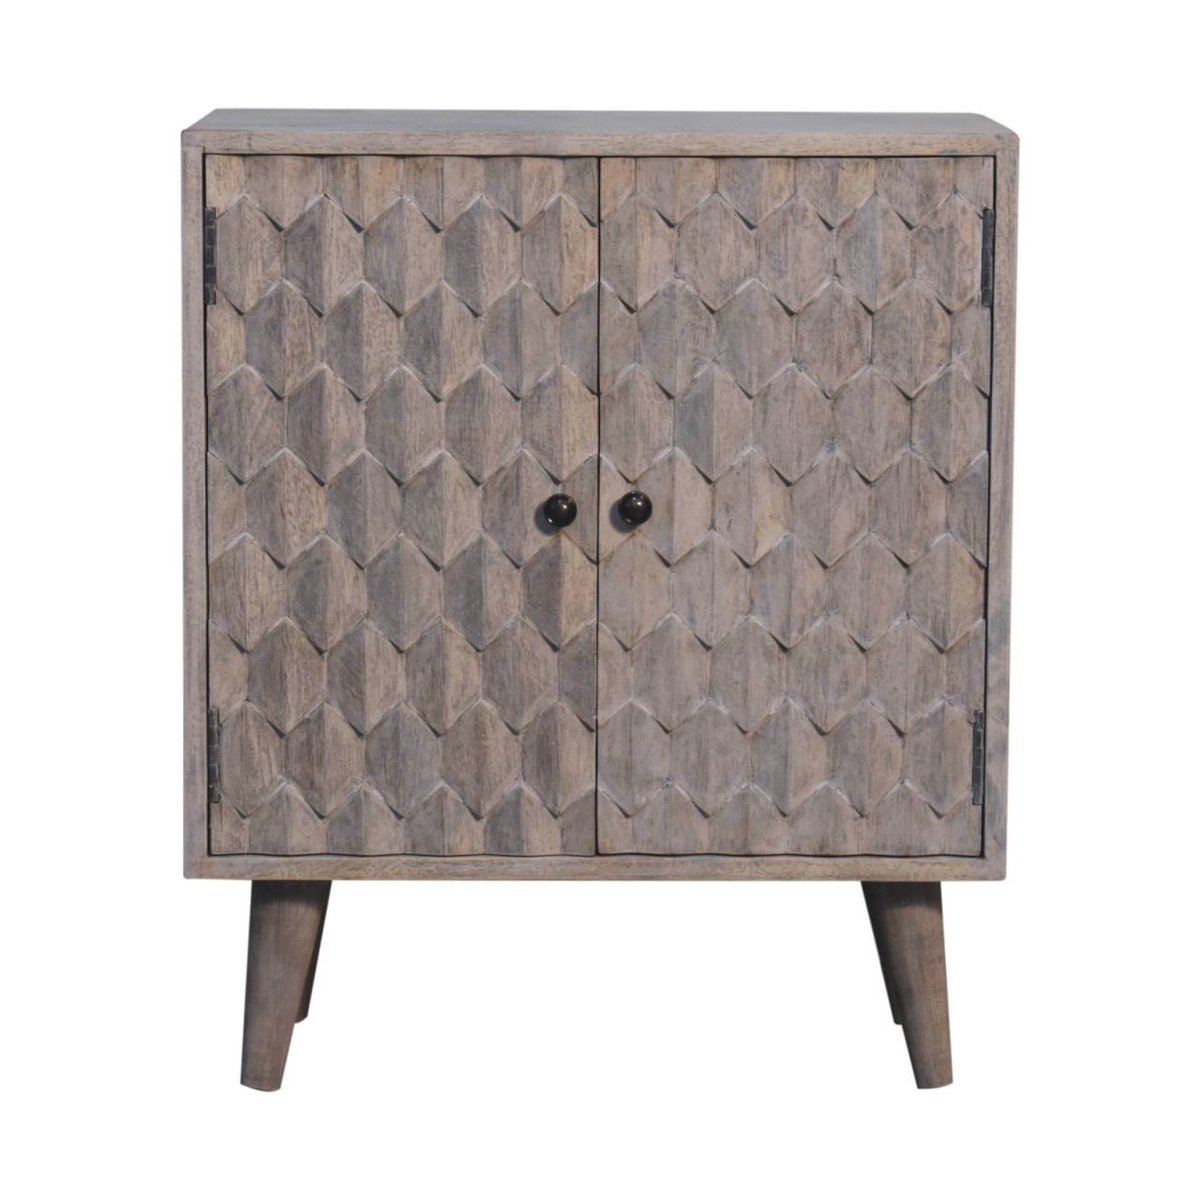 This mini cabinet has been constructed from 100% solid mango wood and has a grey acid-wash finish. Its carved design gives the product a unique twist and provides plenty of storage.

#Acidwash #Solidwood #Artisan 

📞 Contact Us:
Phone: 08006894736
artisanfurniture.net